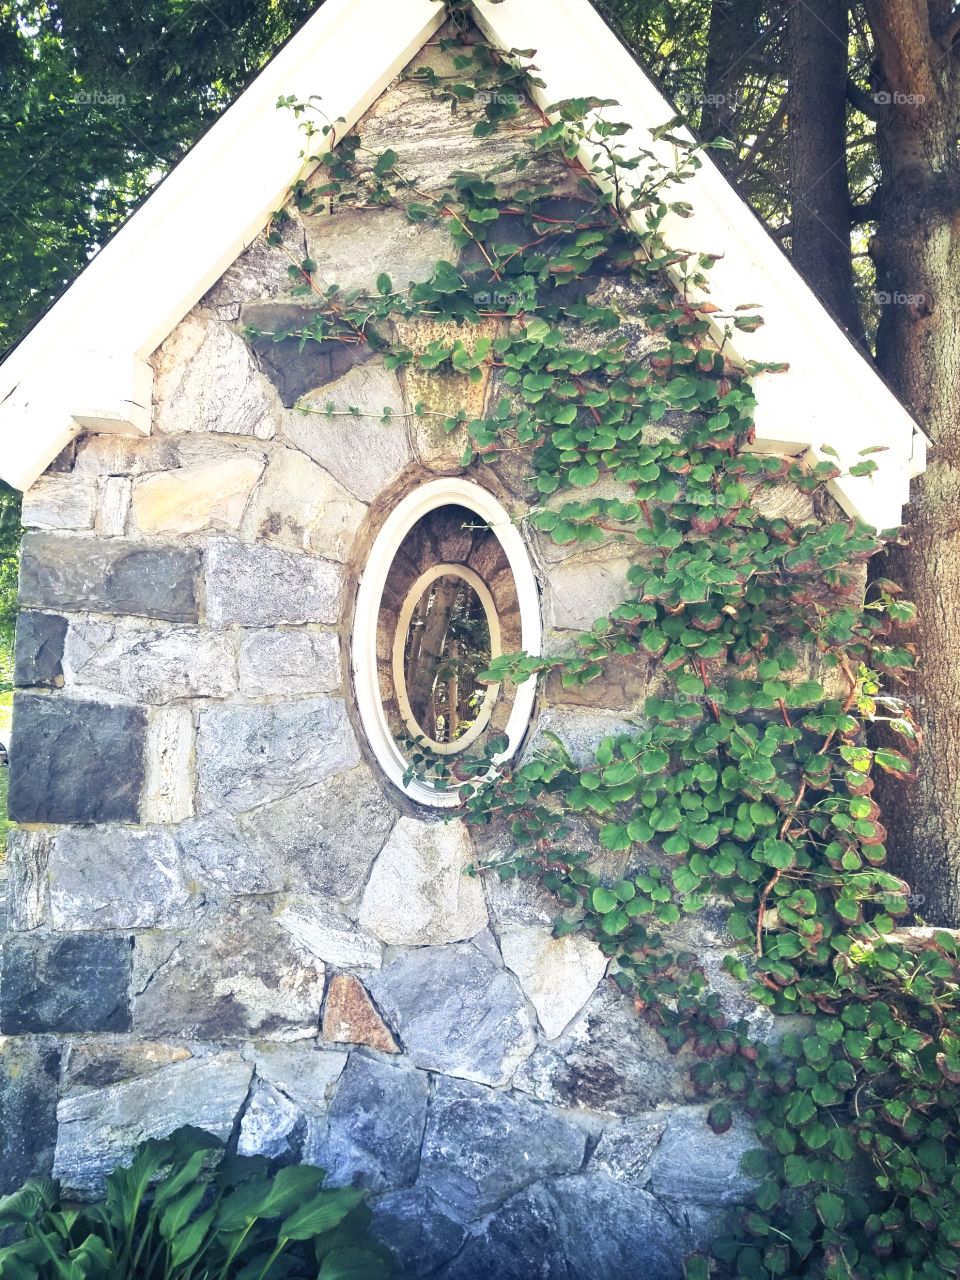 Fairy tale cottage in real life!